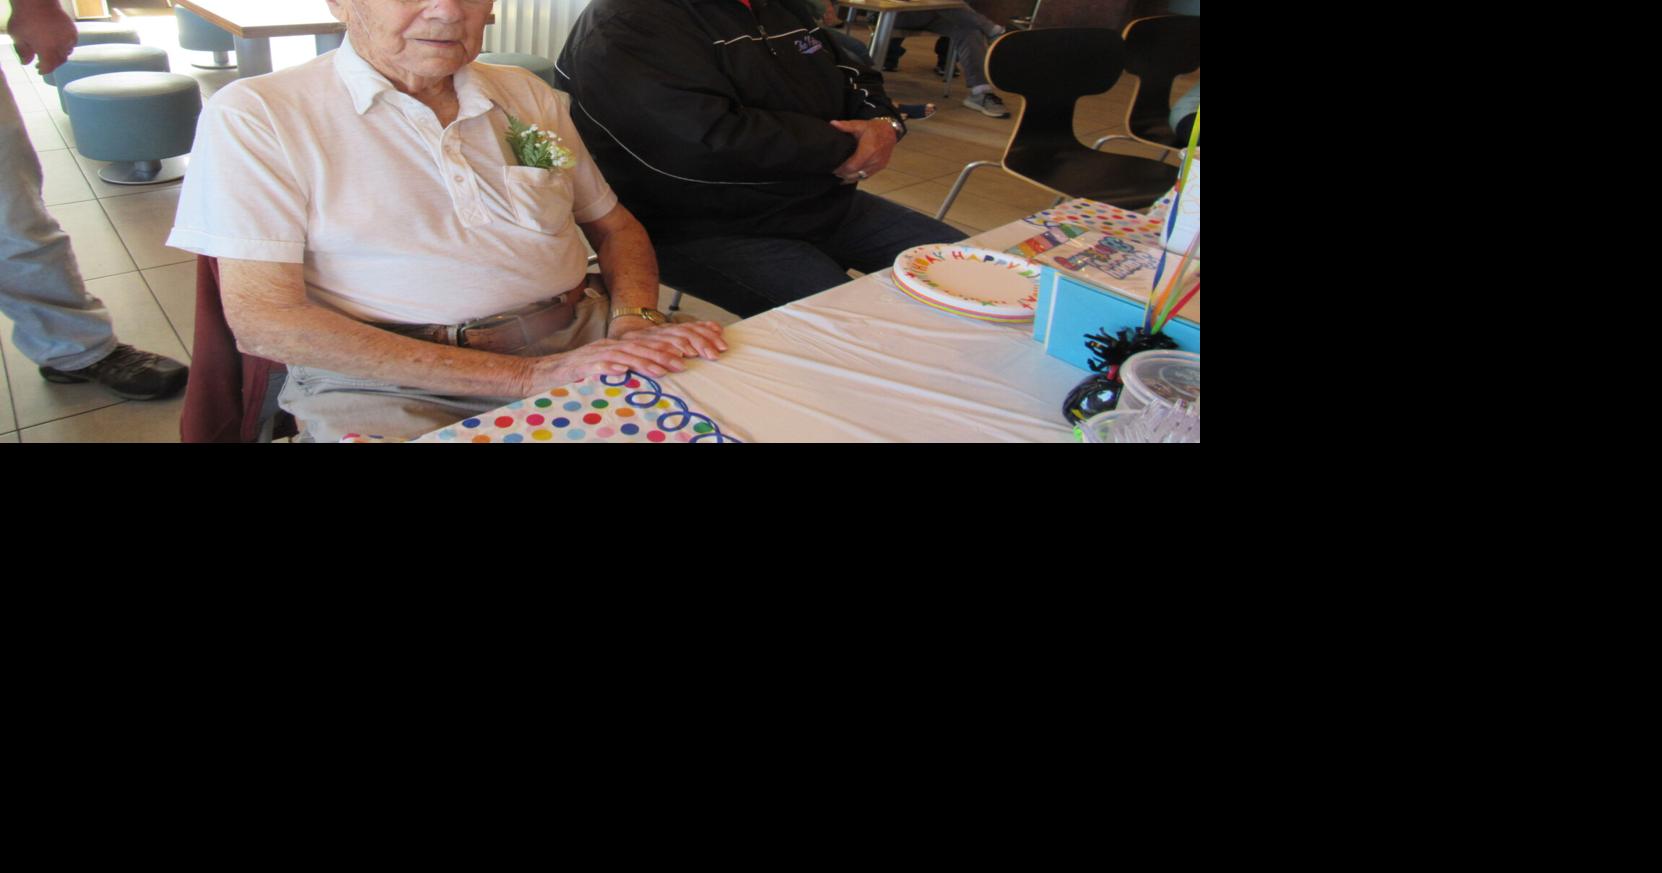 Massena man receives surprise party in advance of 100th birthday